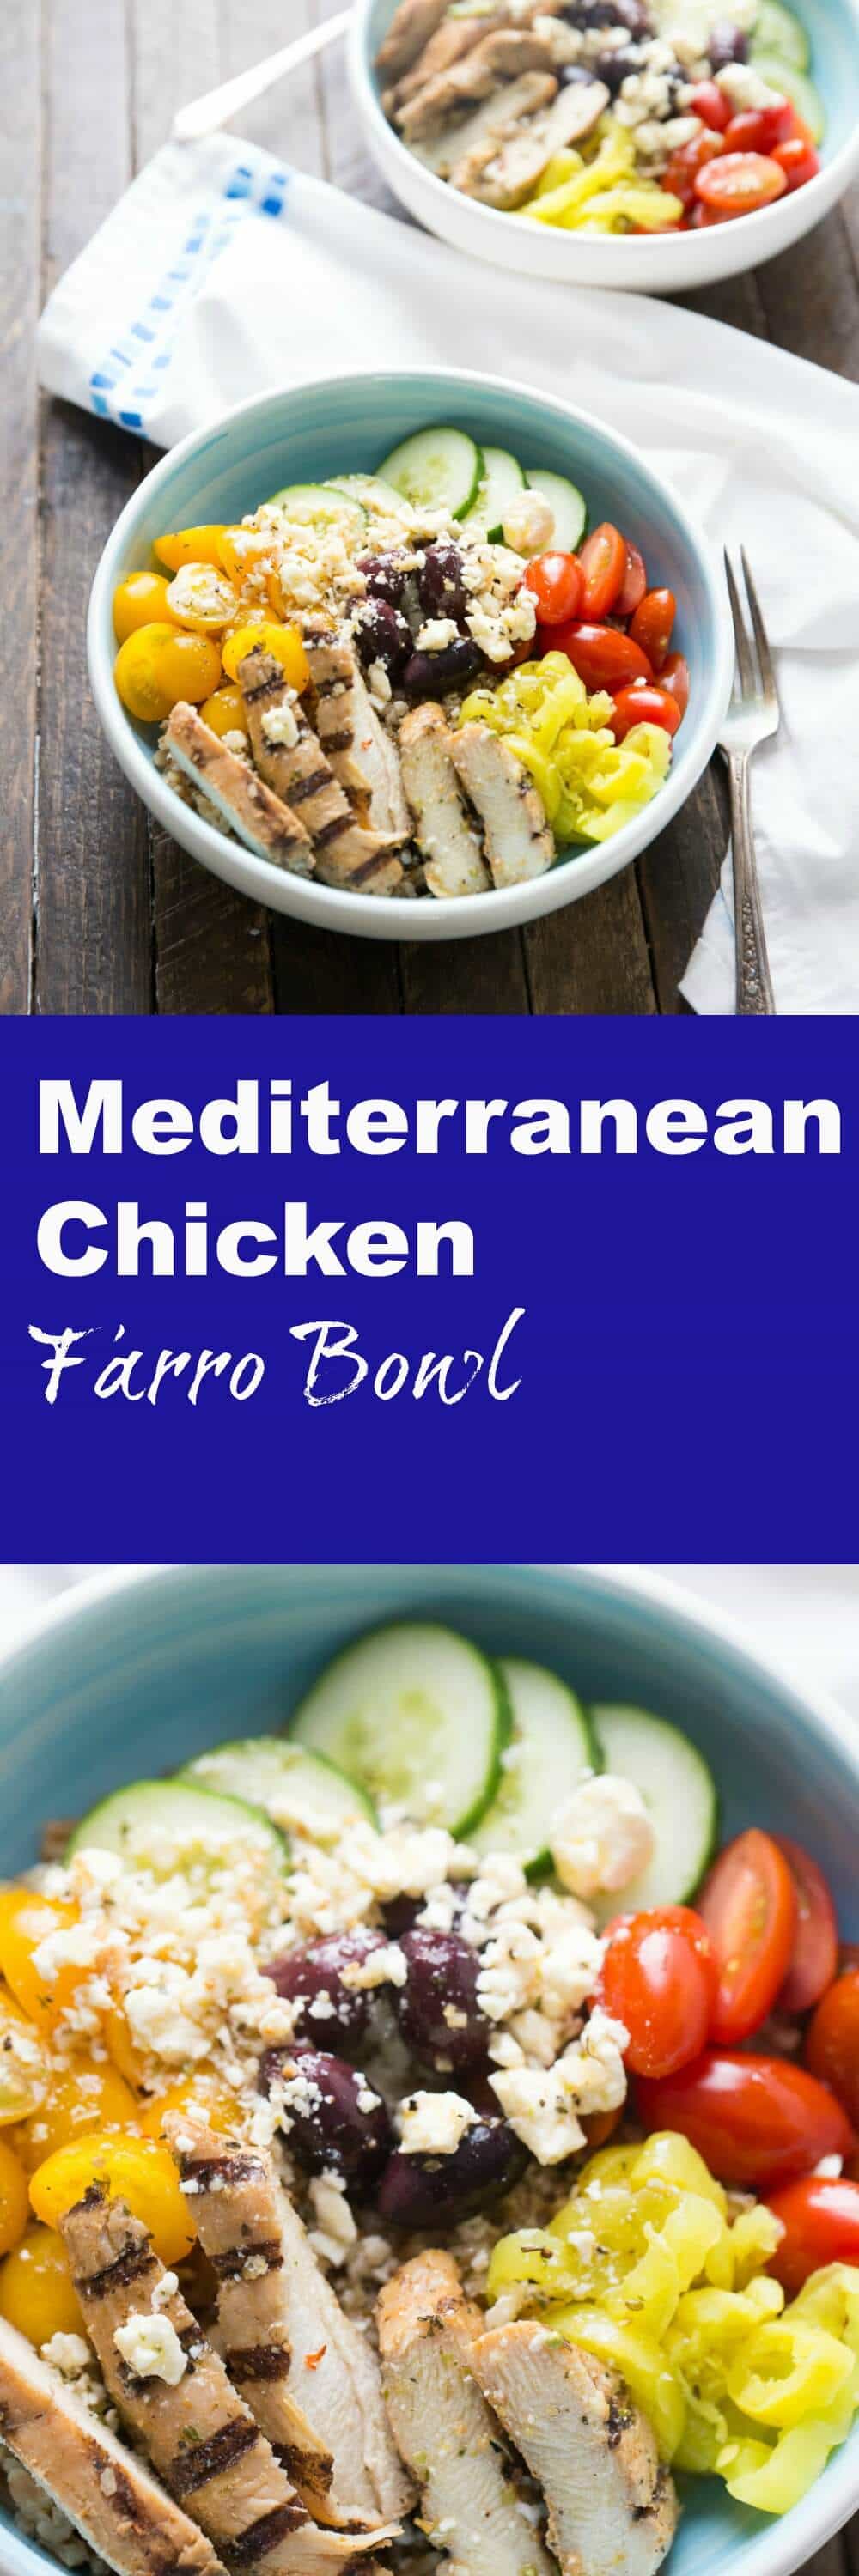 This Mediterranean chicken bowl will be one of those meals you turn to over and over again when you want something easy and healthy! This bowl is filled with so many flavors, it is absolutely delicious! lemonsforlulu.com @jvillesausage